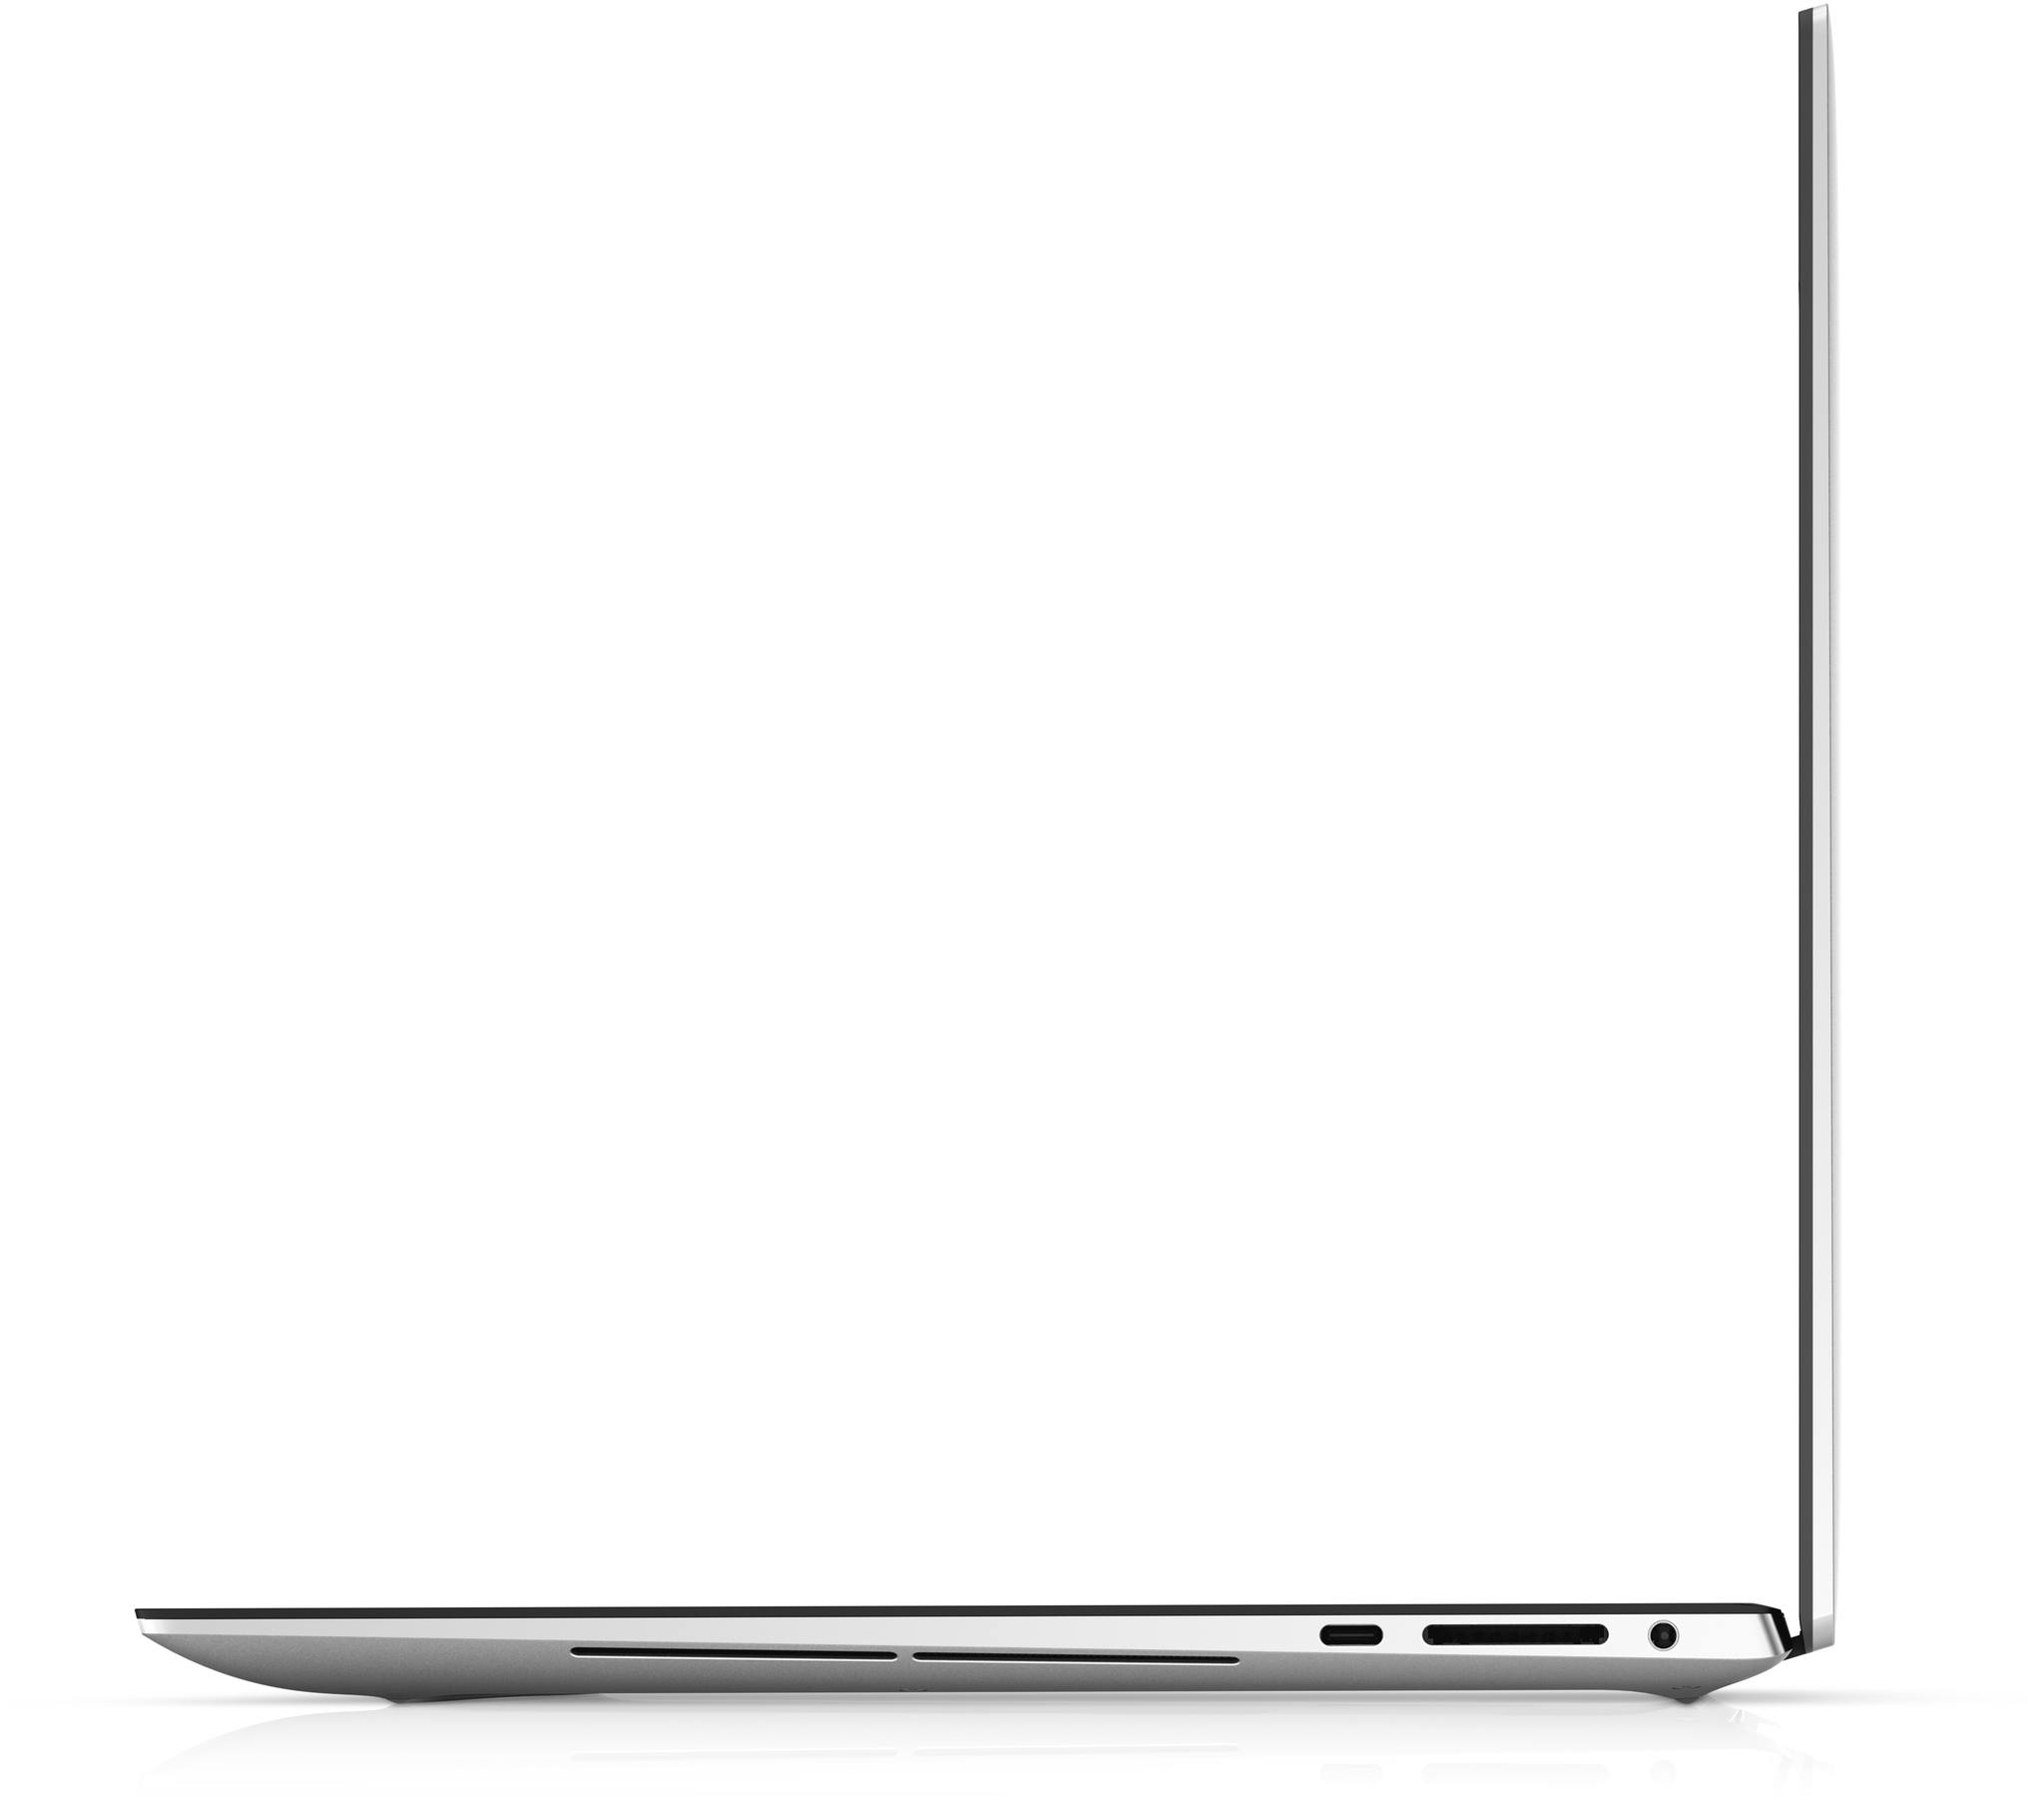 [Mới 100%] Laptop Dell XPS 15 9520 (Core i5-12500H, 16GB, 256GB, UHD Graphics, 15.6" FHD+)